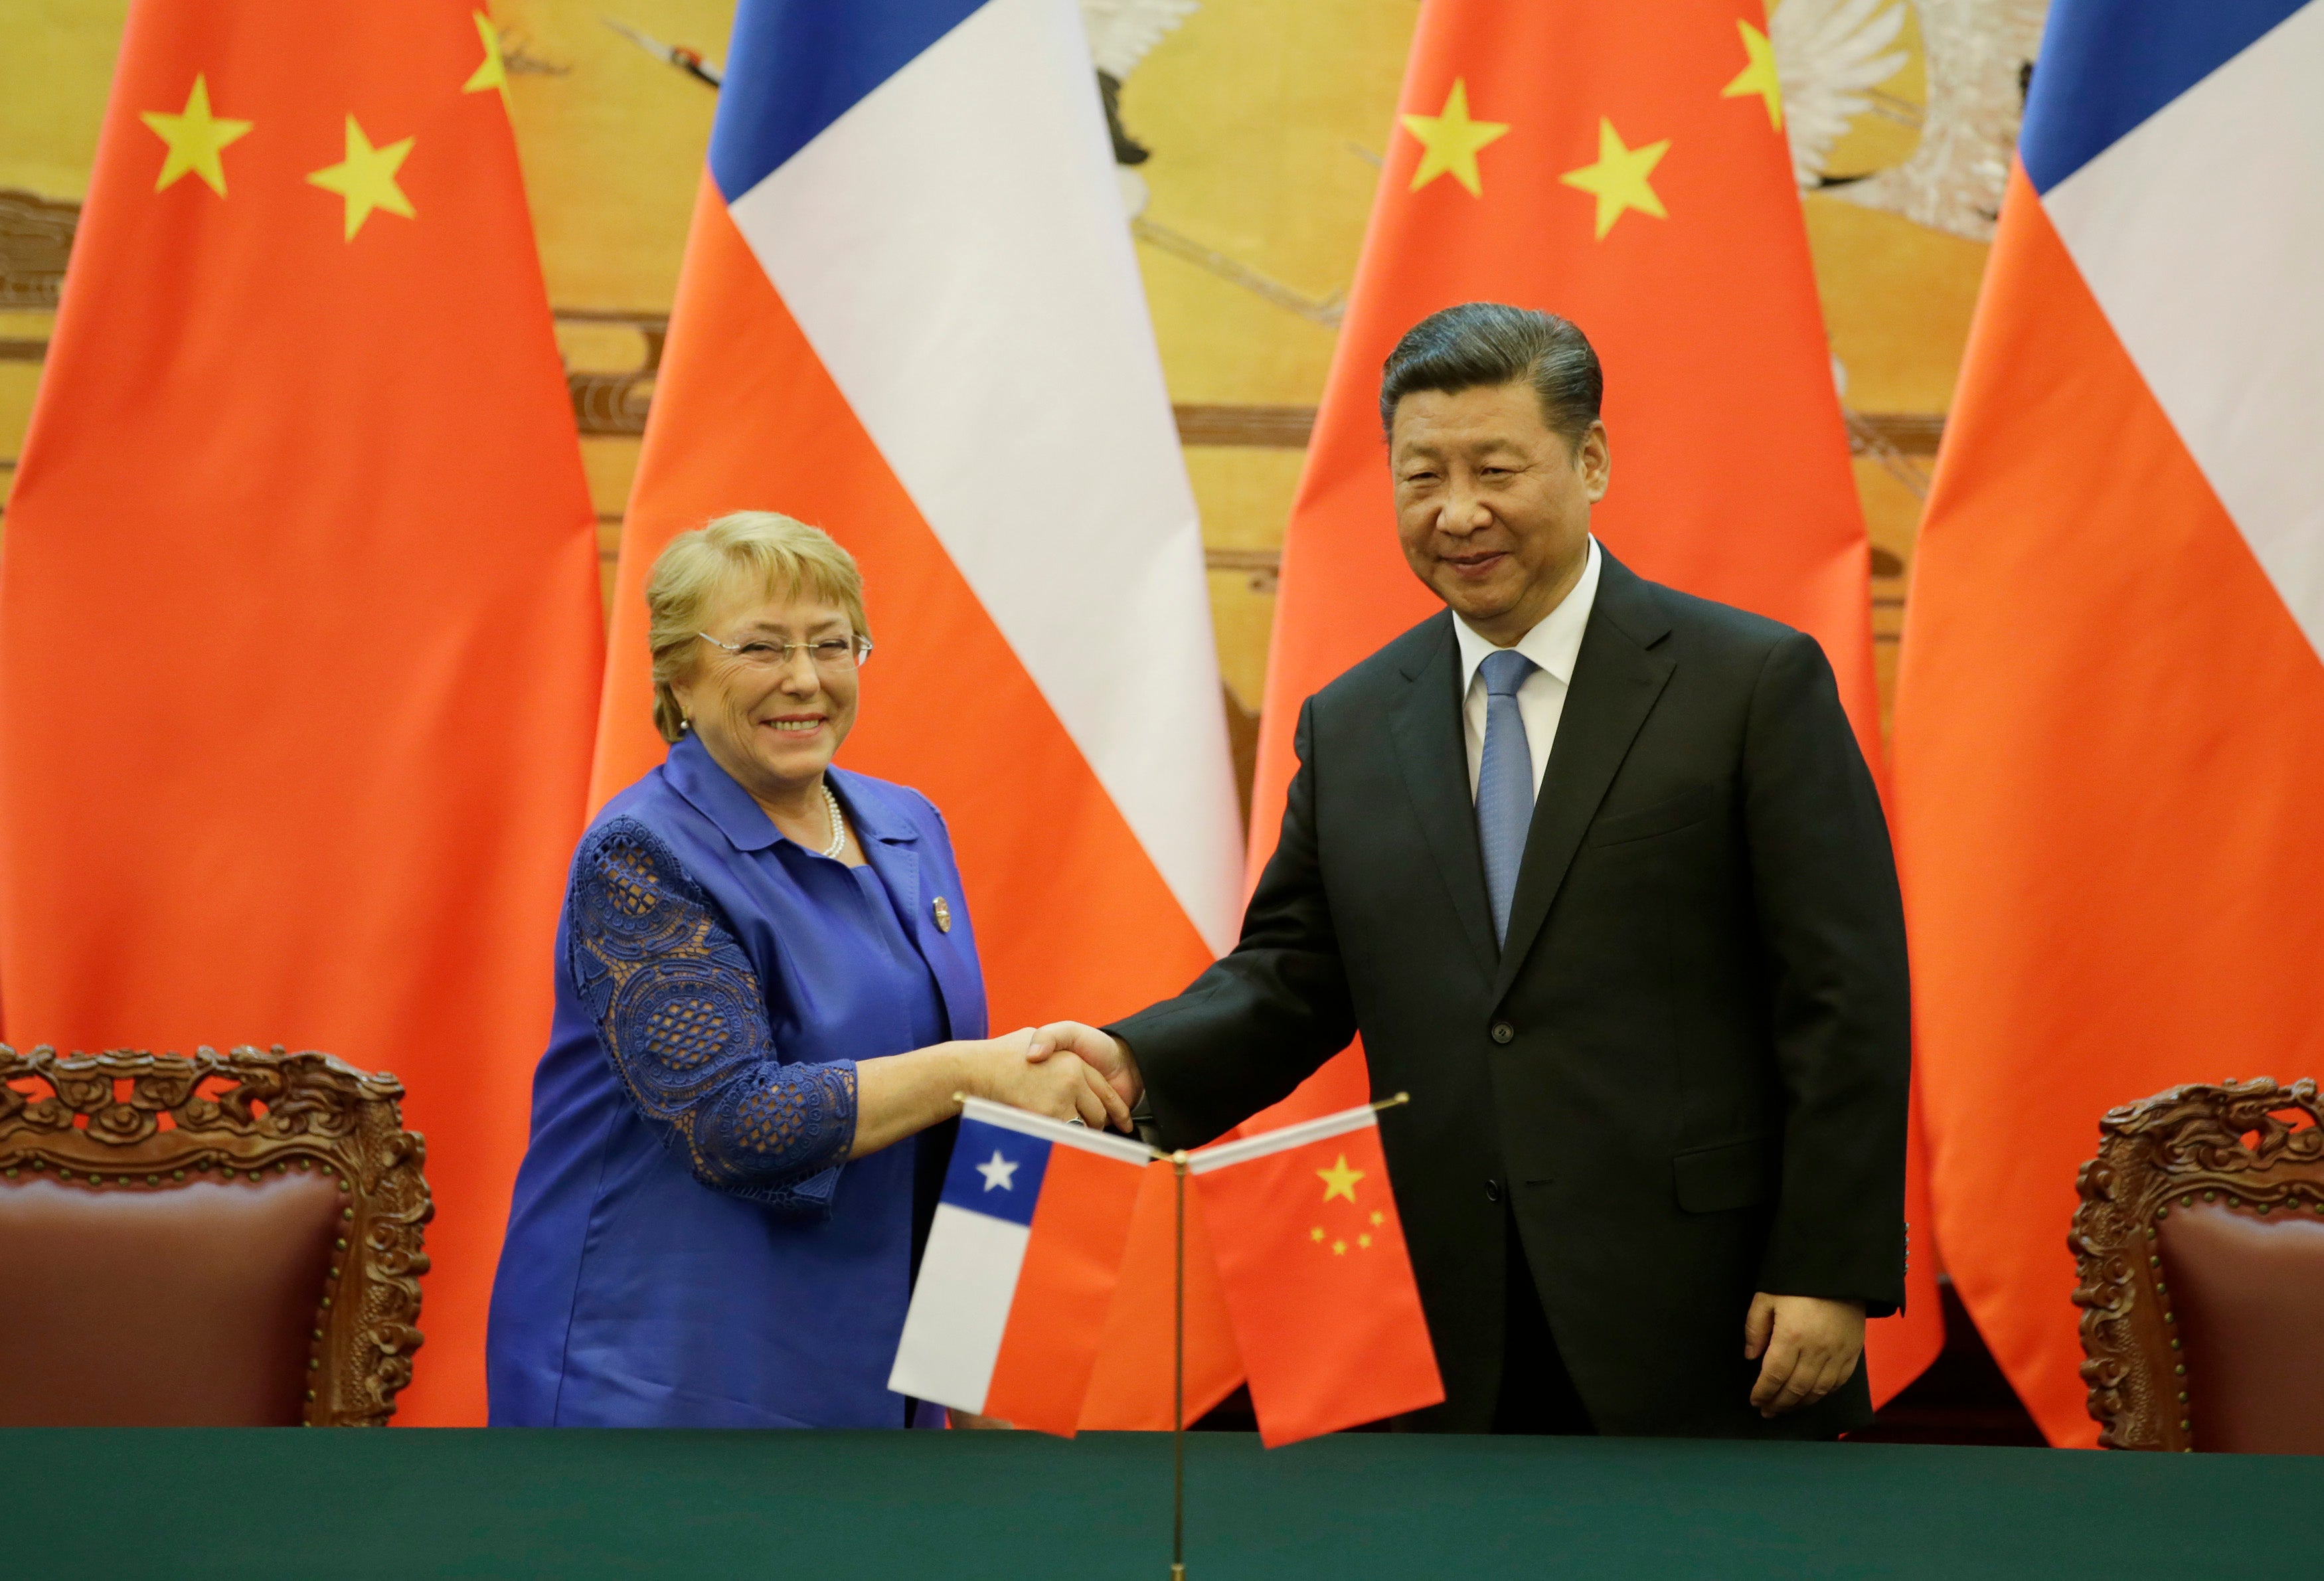 File photo: Michelle Bachelet and Chinese President Xi Jinping attend a signing ceremony ahead of the Belt and Road Forum in Beijing, China in 2017